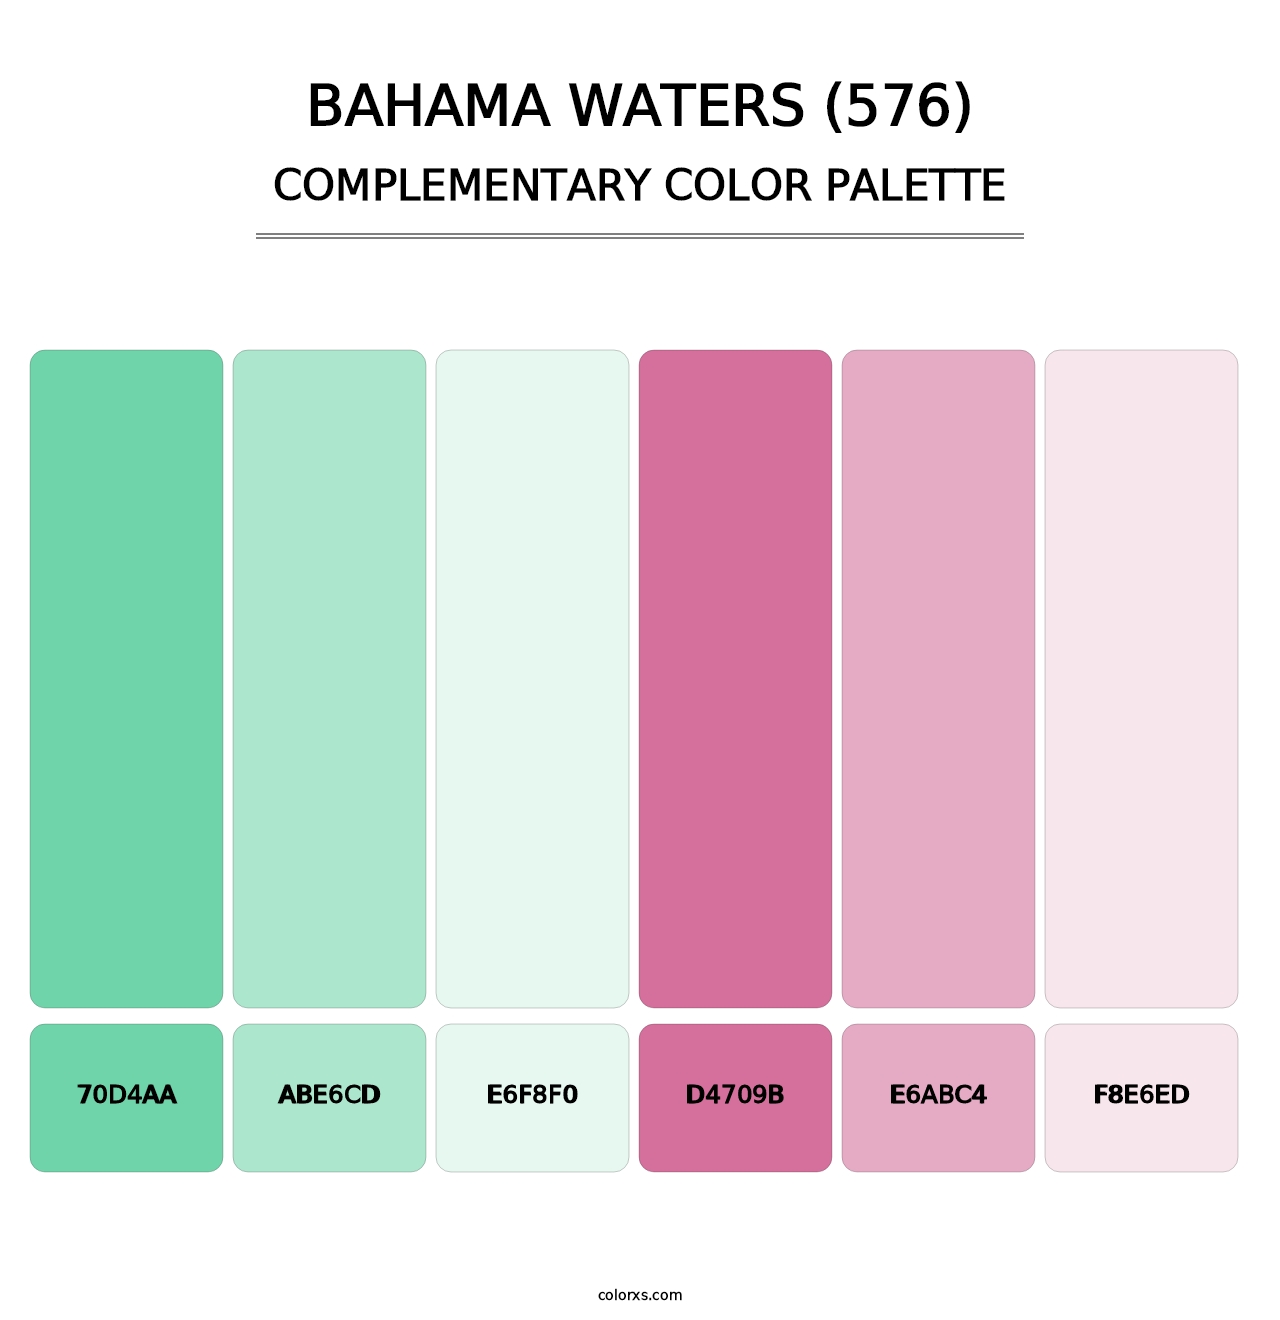 Bahama Waters (576) - Complementary Color Palette